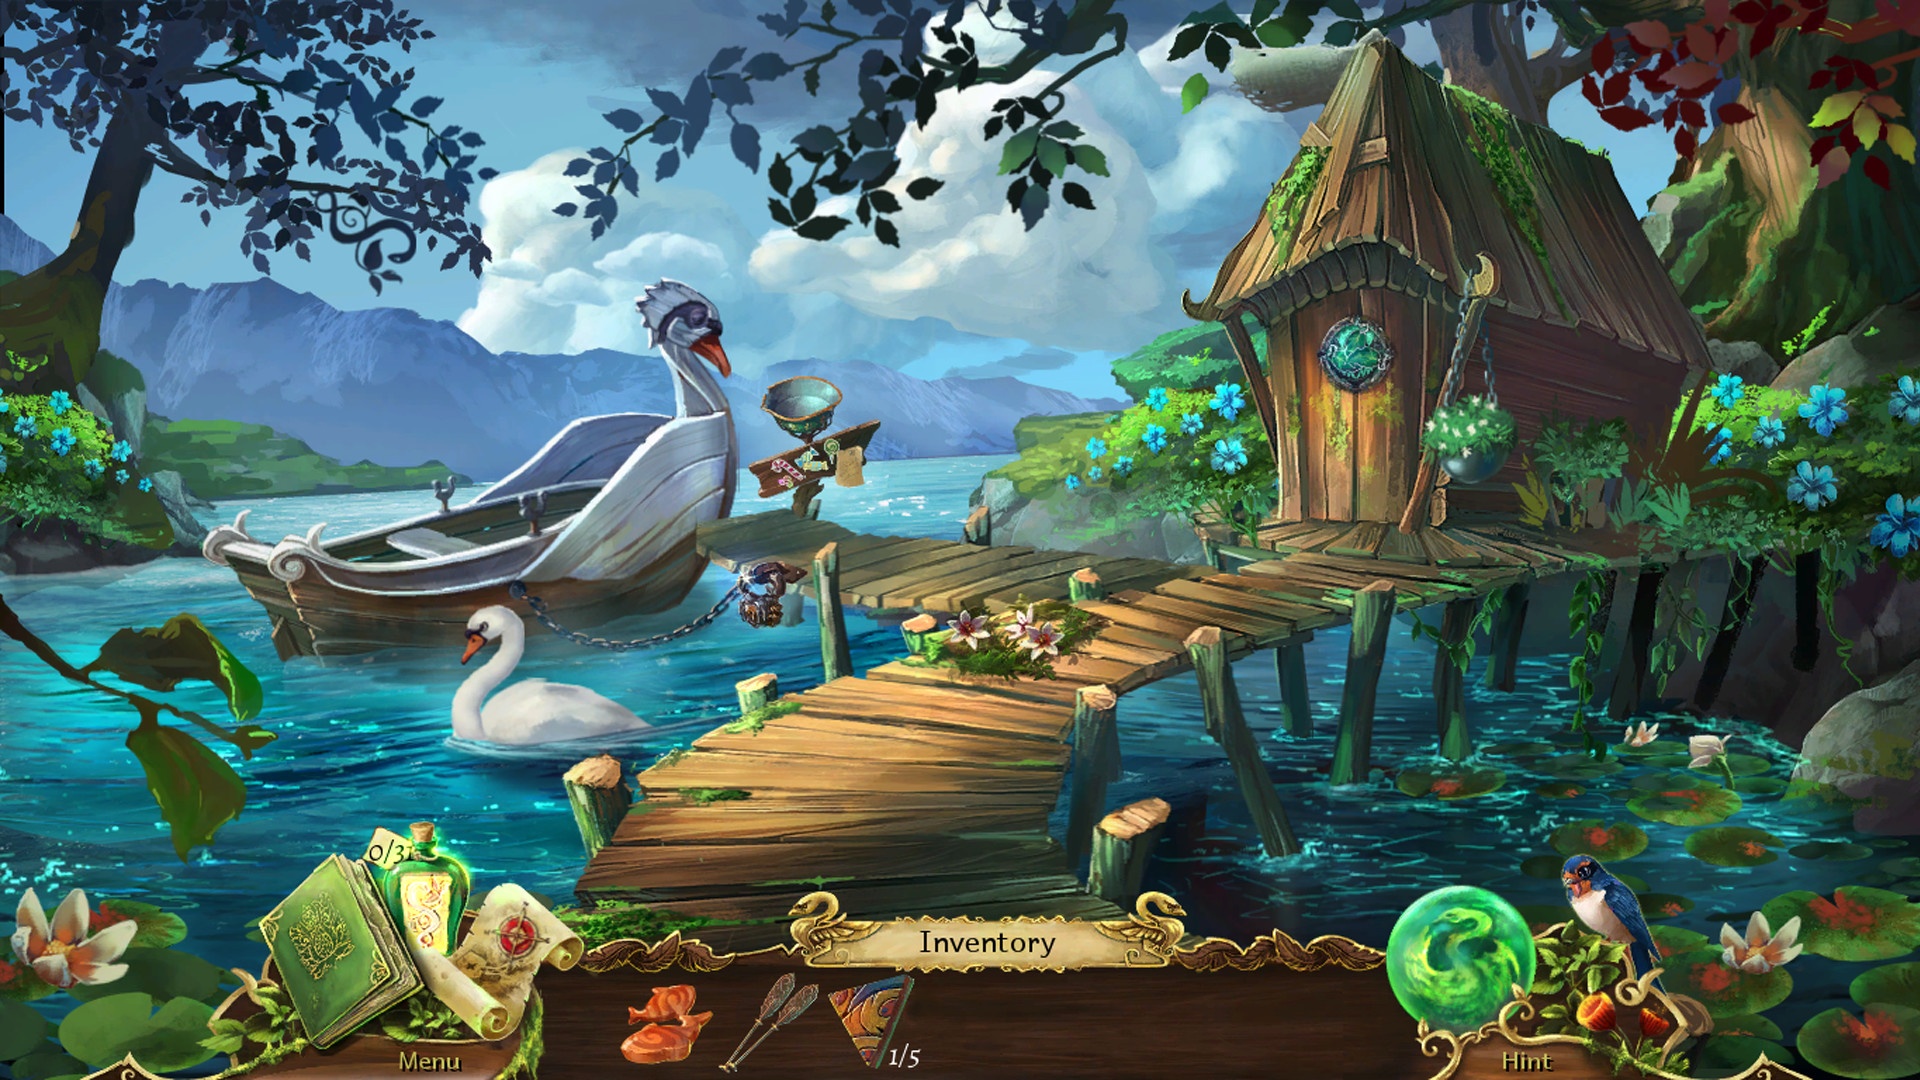 adventure, Artifex Mundi, Avanquest Software, Big Fish Games, casual, Grim Legends 2: Song of the Dark Swan, Grim Legends 2: Song of the Dark Swan Review, Hidden Object, Mystery, Point & Click, Puzzle, Xbox One, Xbox One Review